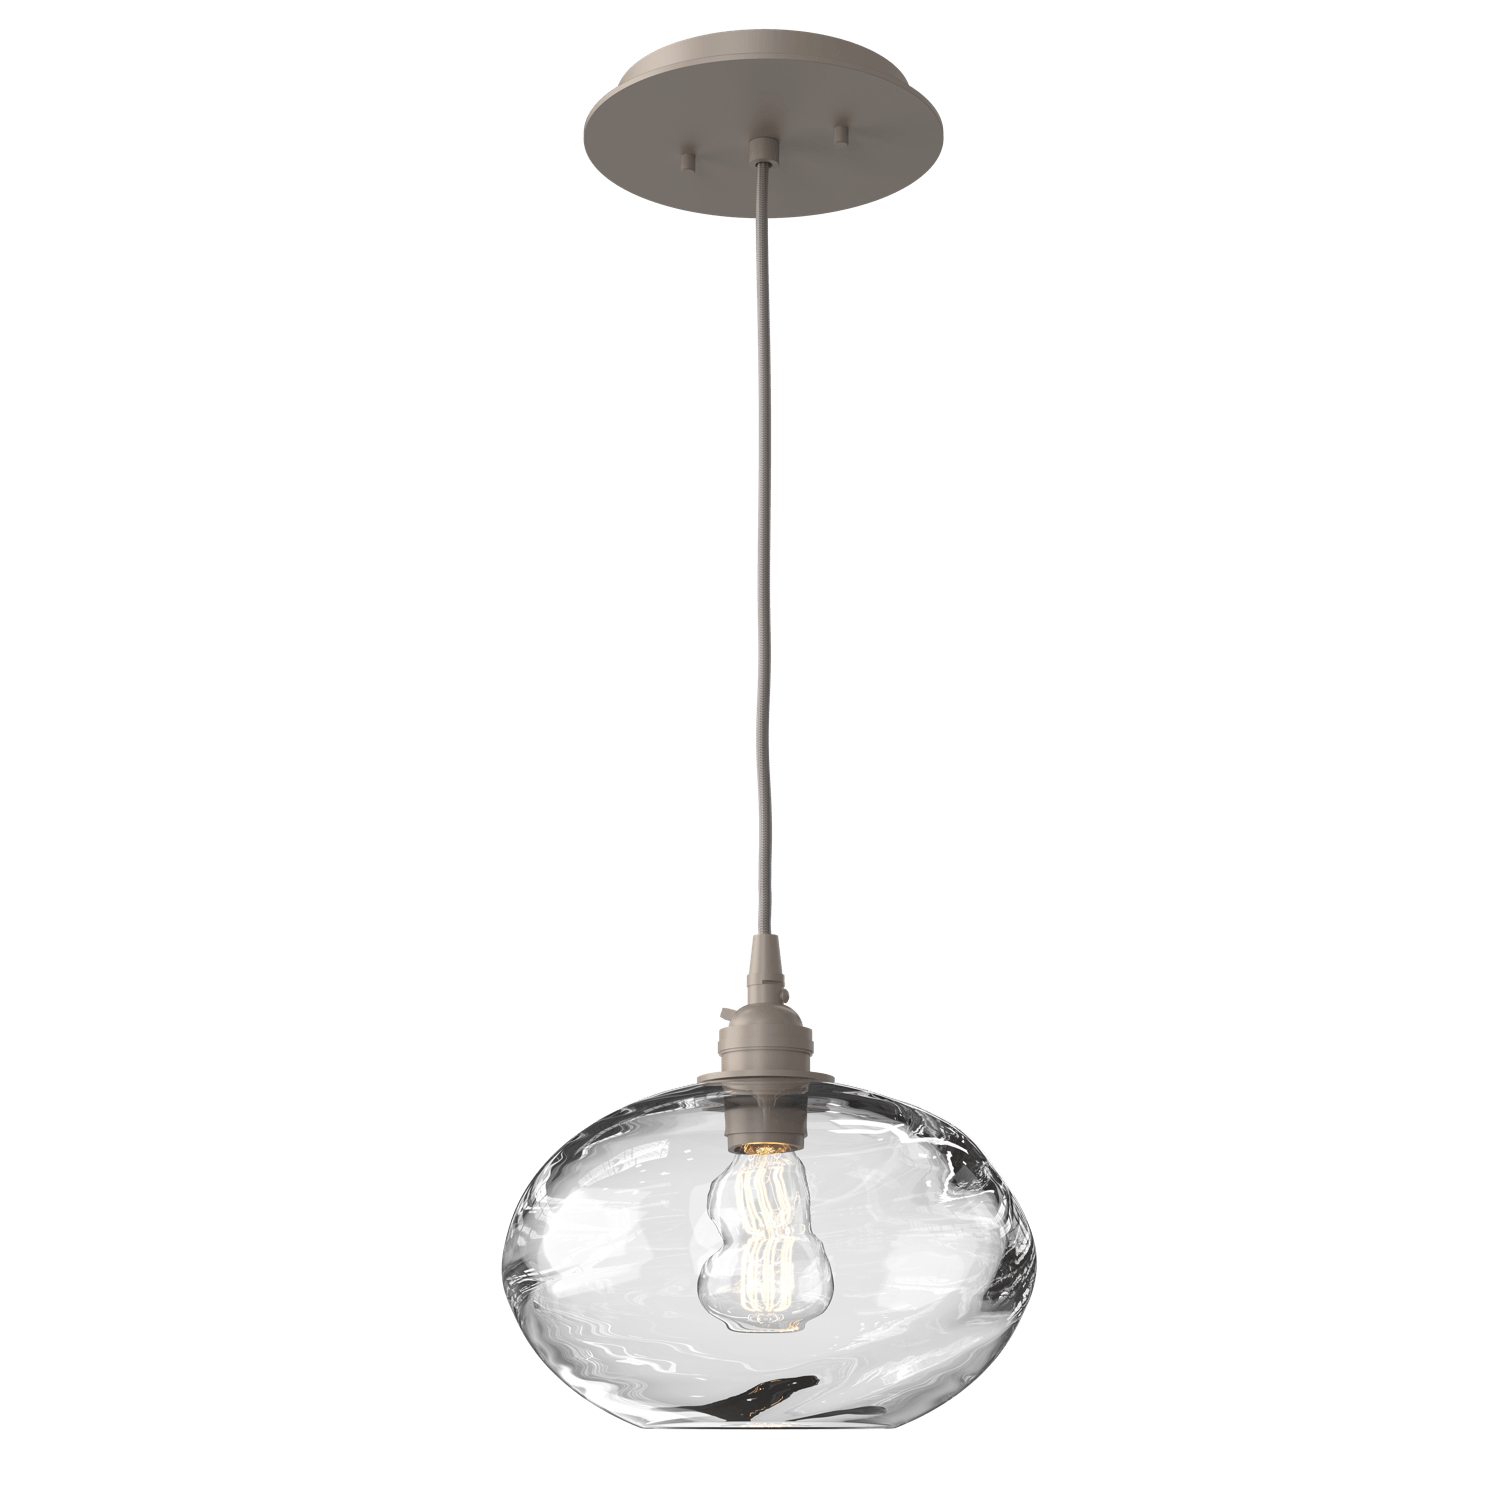 LAB0036-01-BS-OC-Hammerton-Studio-Optic-Blown-Glass-Coppa-pendant-light-with-metallic-beige-silver-finish-and-optic-clear-blown-glass-shades-and-incandescent-lamping